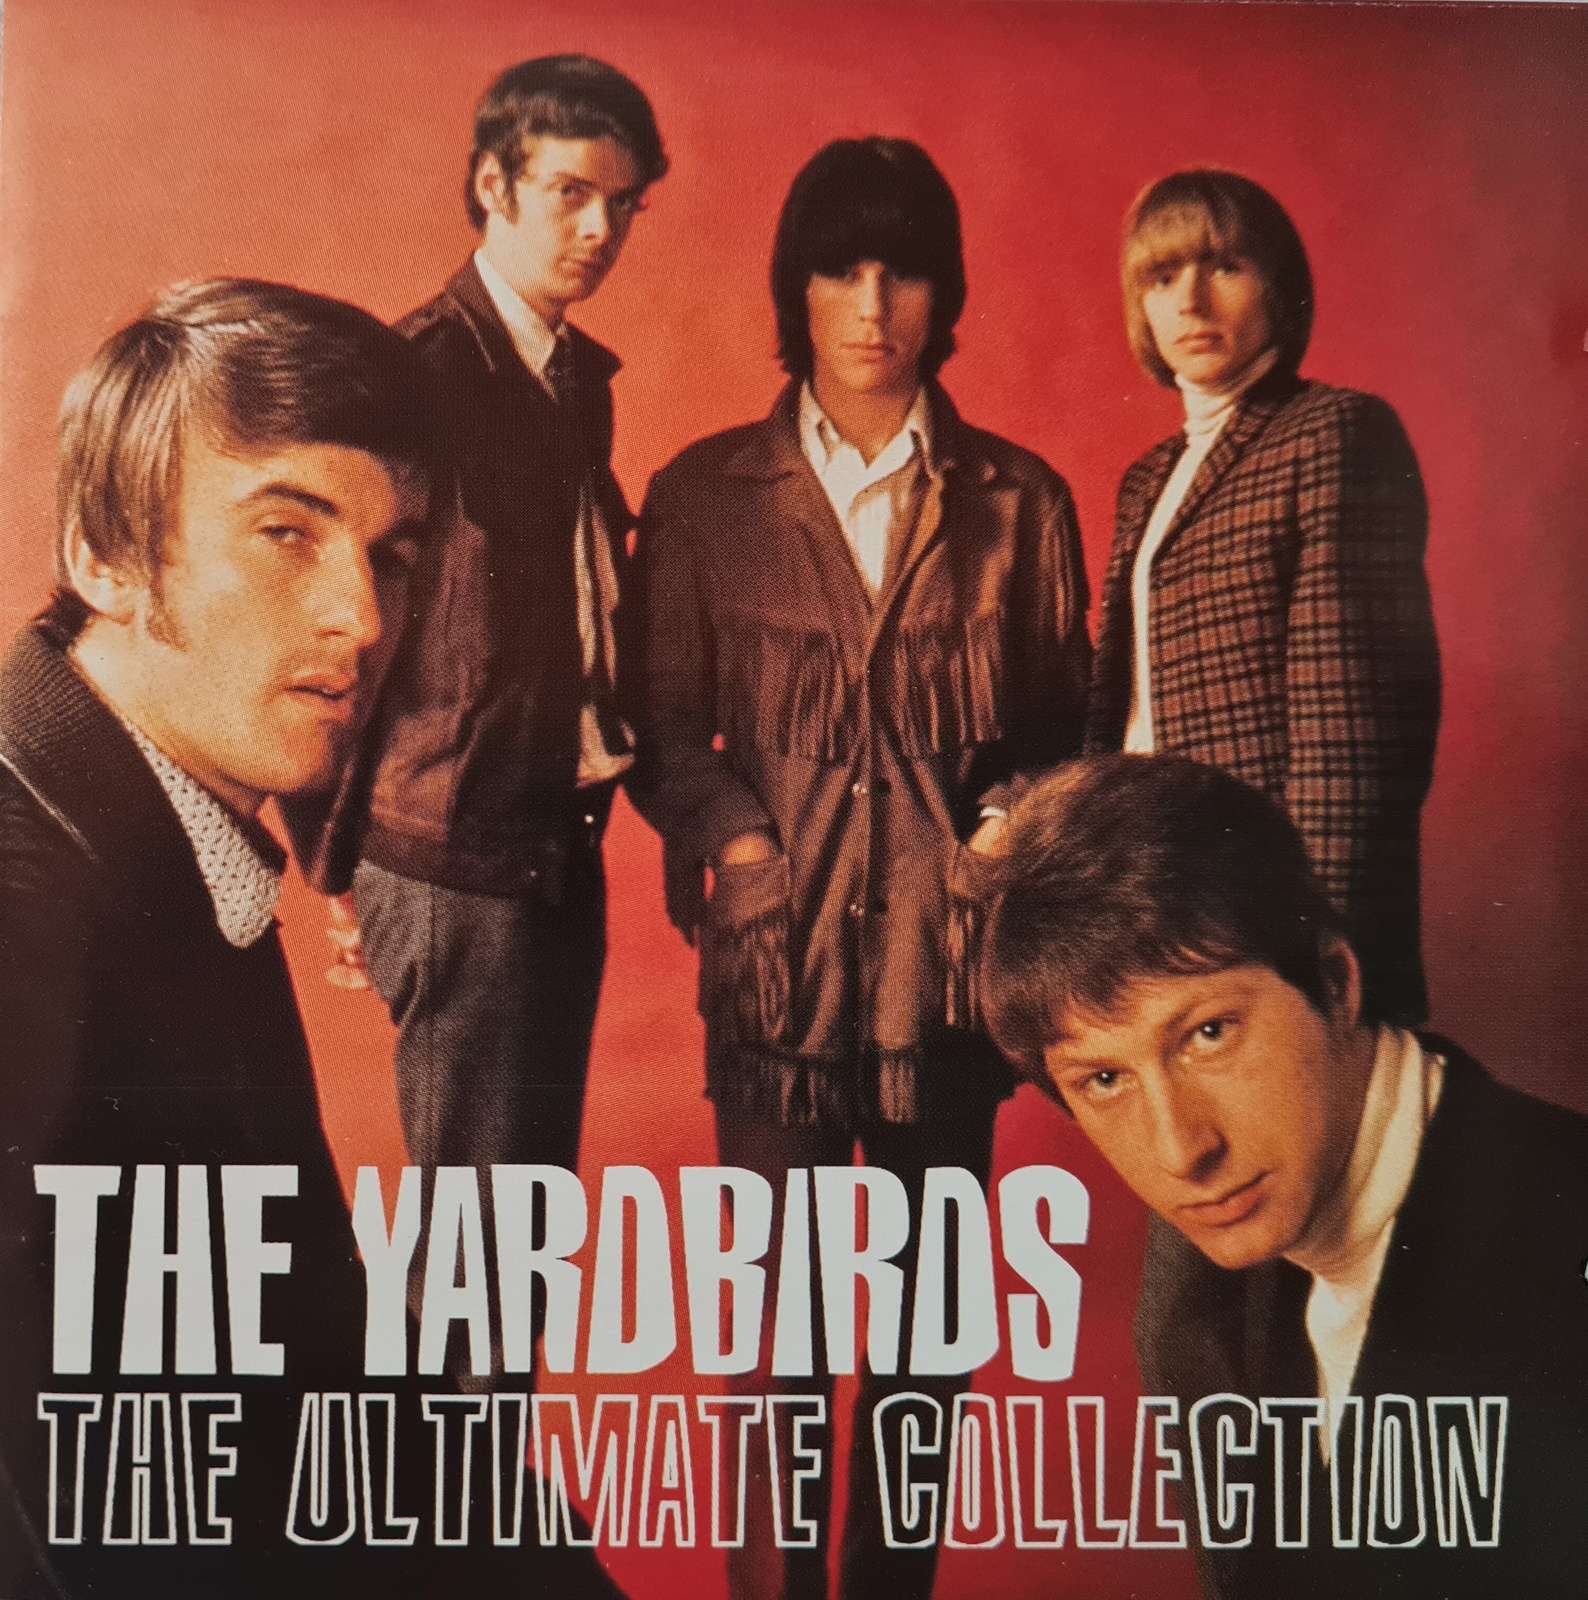 The Yardbirds - The Ultimate Collection CD